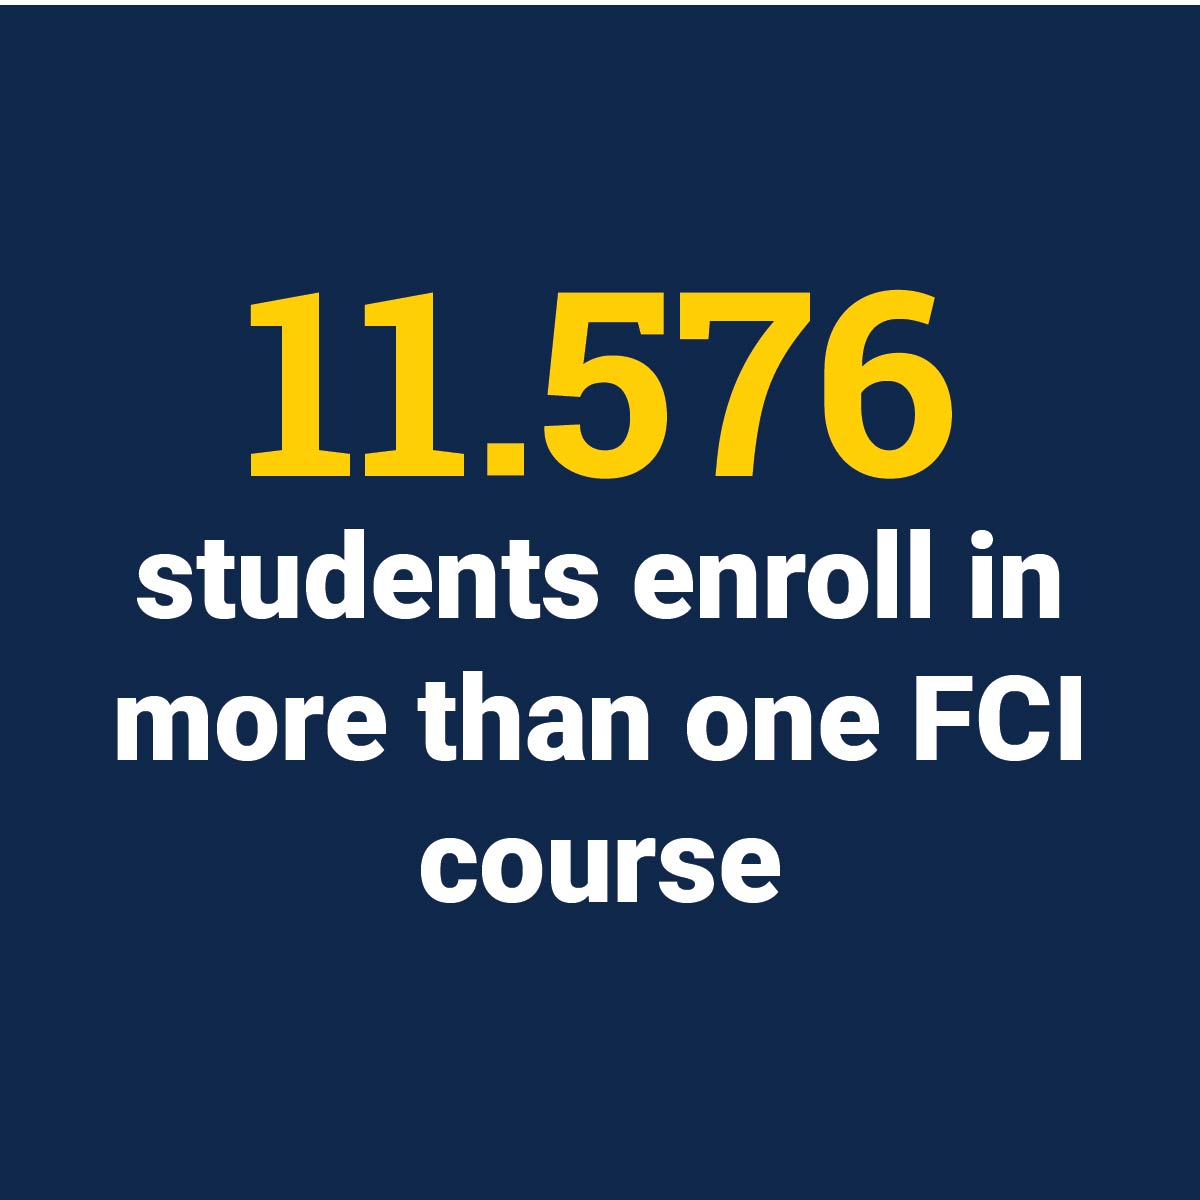 11,576 students enroll in more than one FCI course